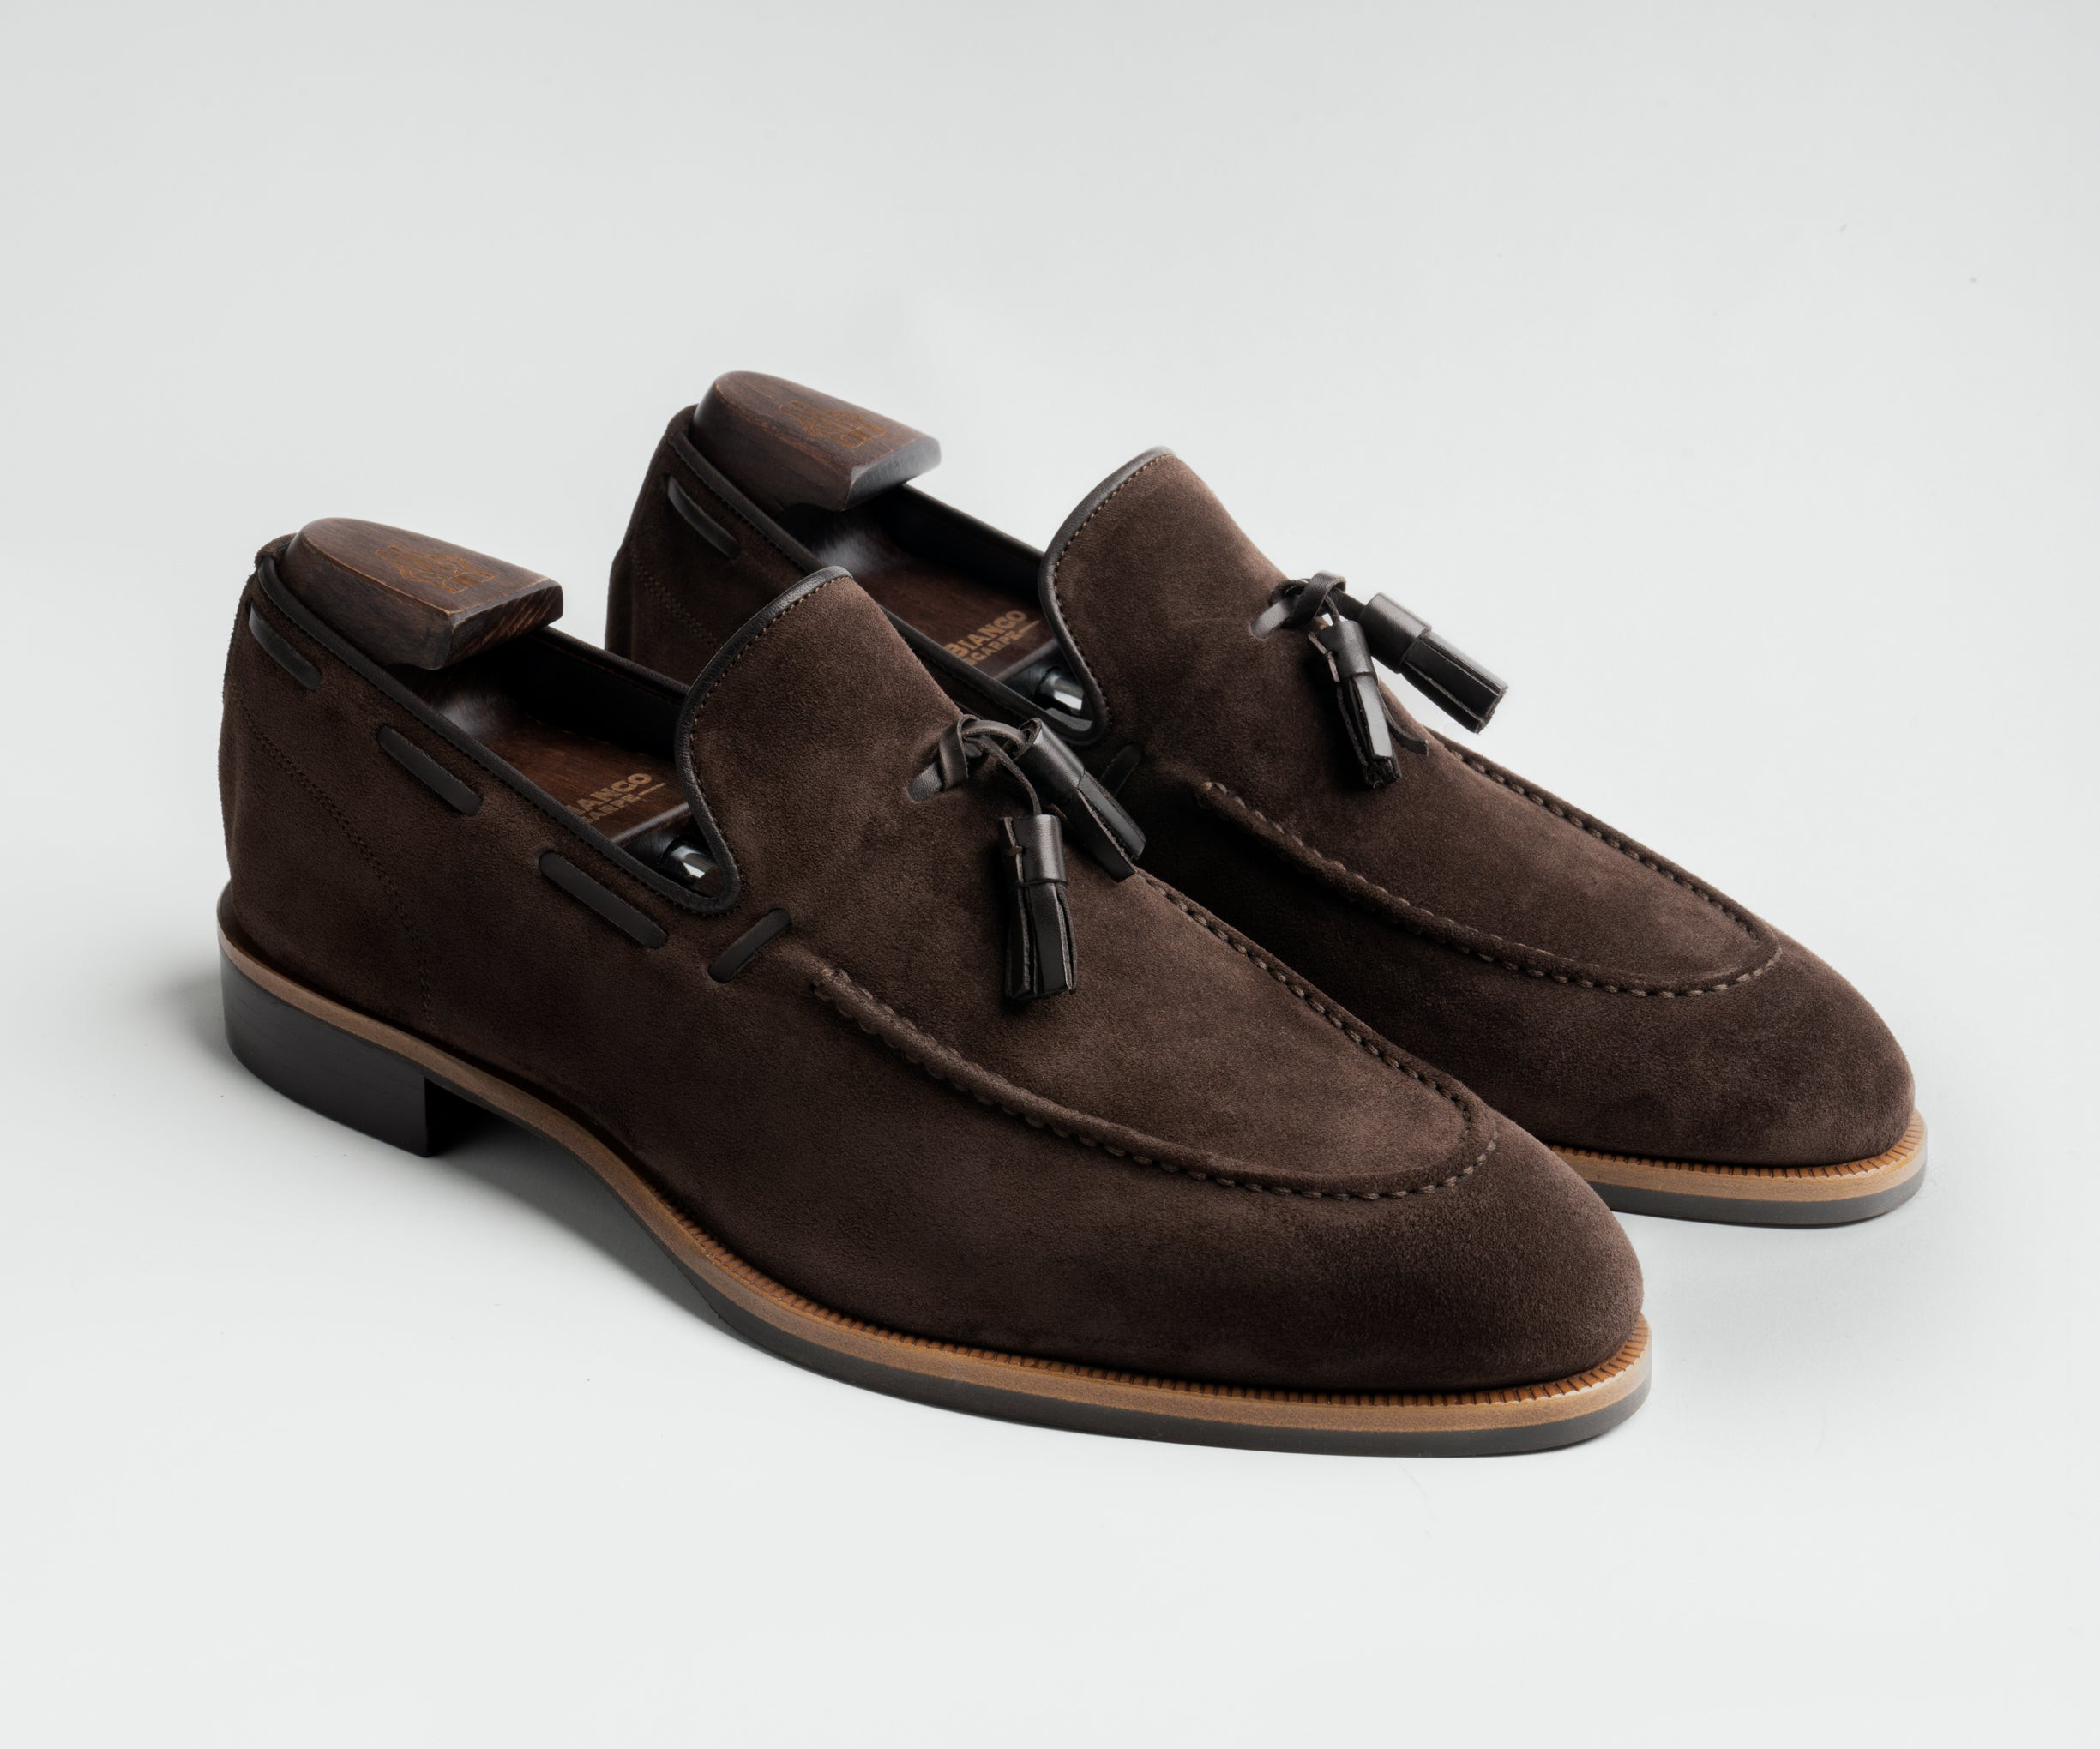 Napoli Bear Suede Loafer